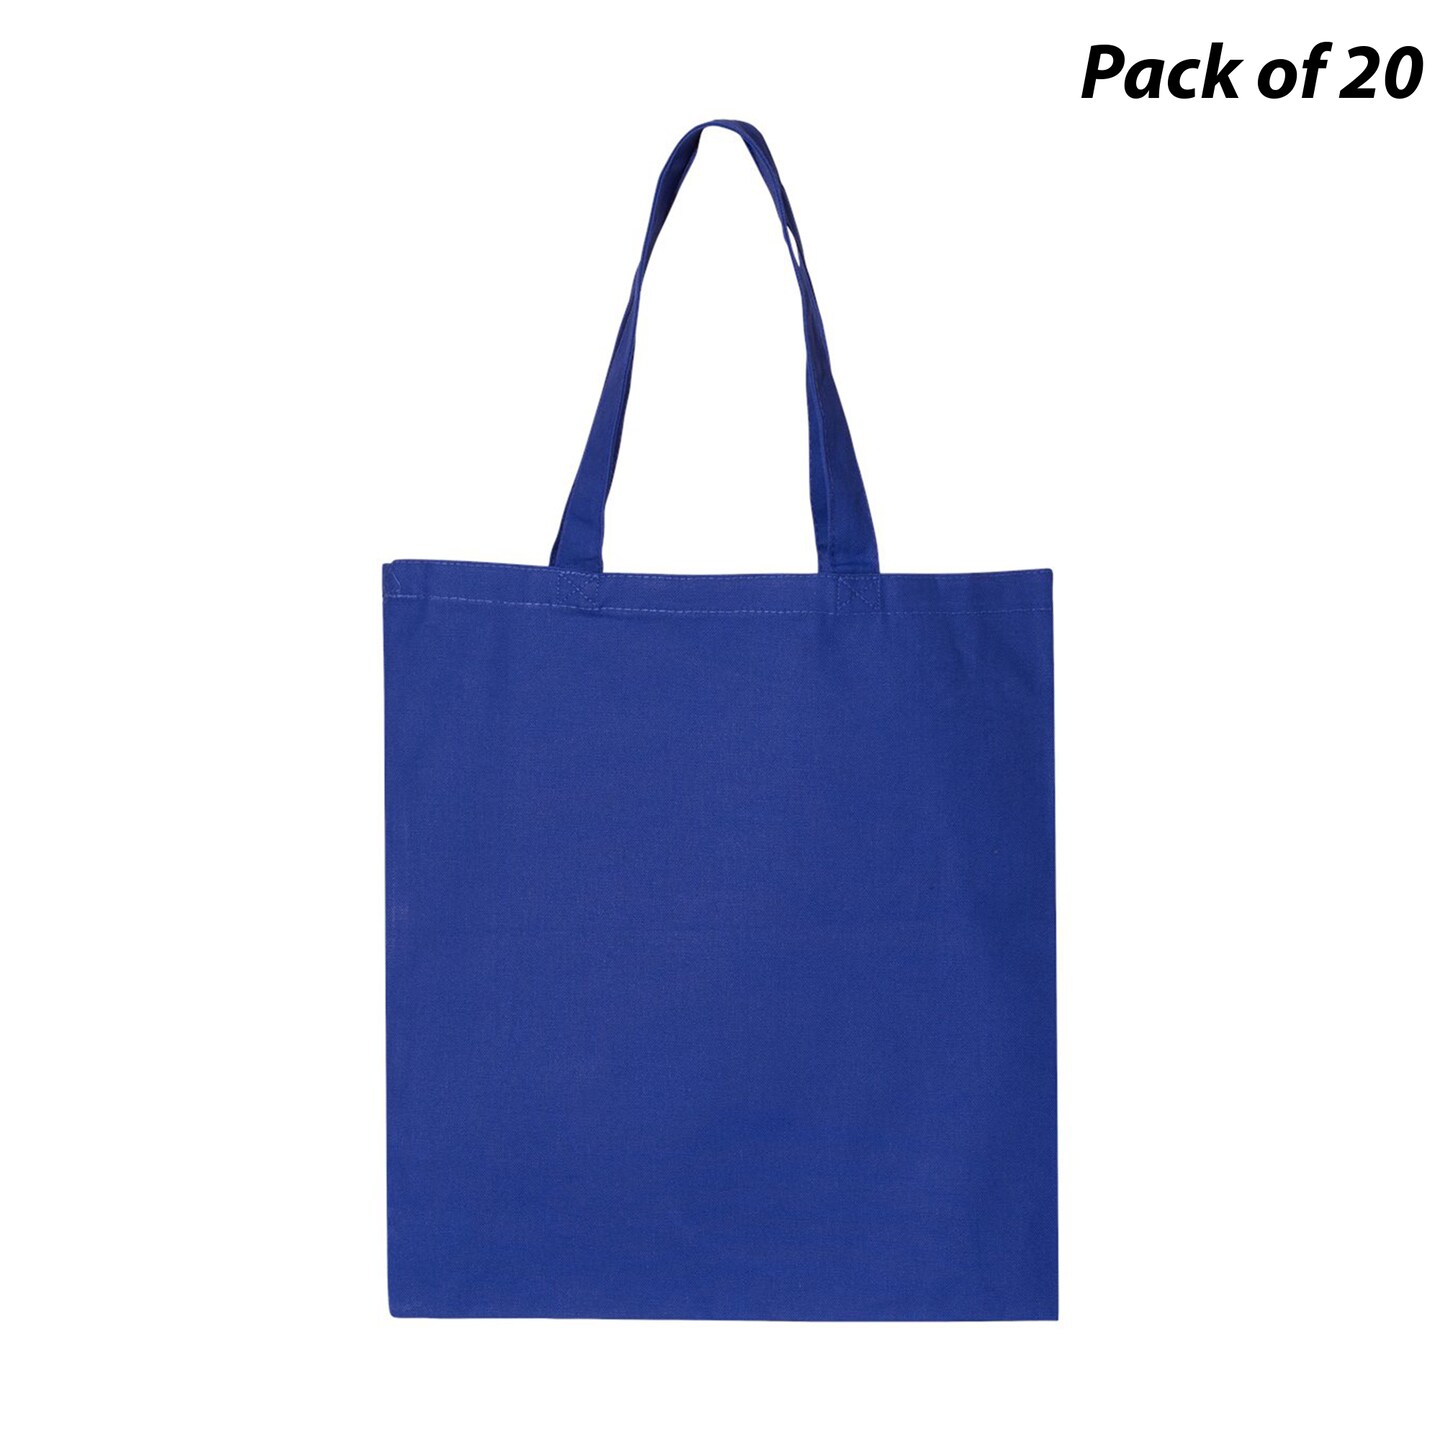 100% Cotton Fabric, White Carry Bag, With Long Handle, For Shopping  Capacity: 5 Kg/day at Best Price in Pune | Khushi Enterprises